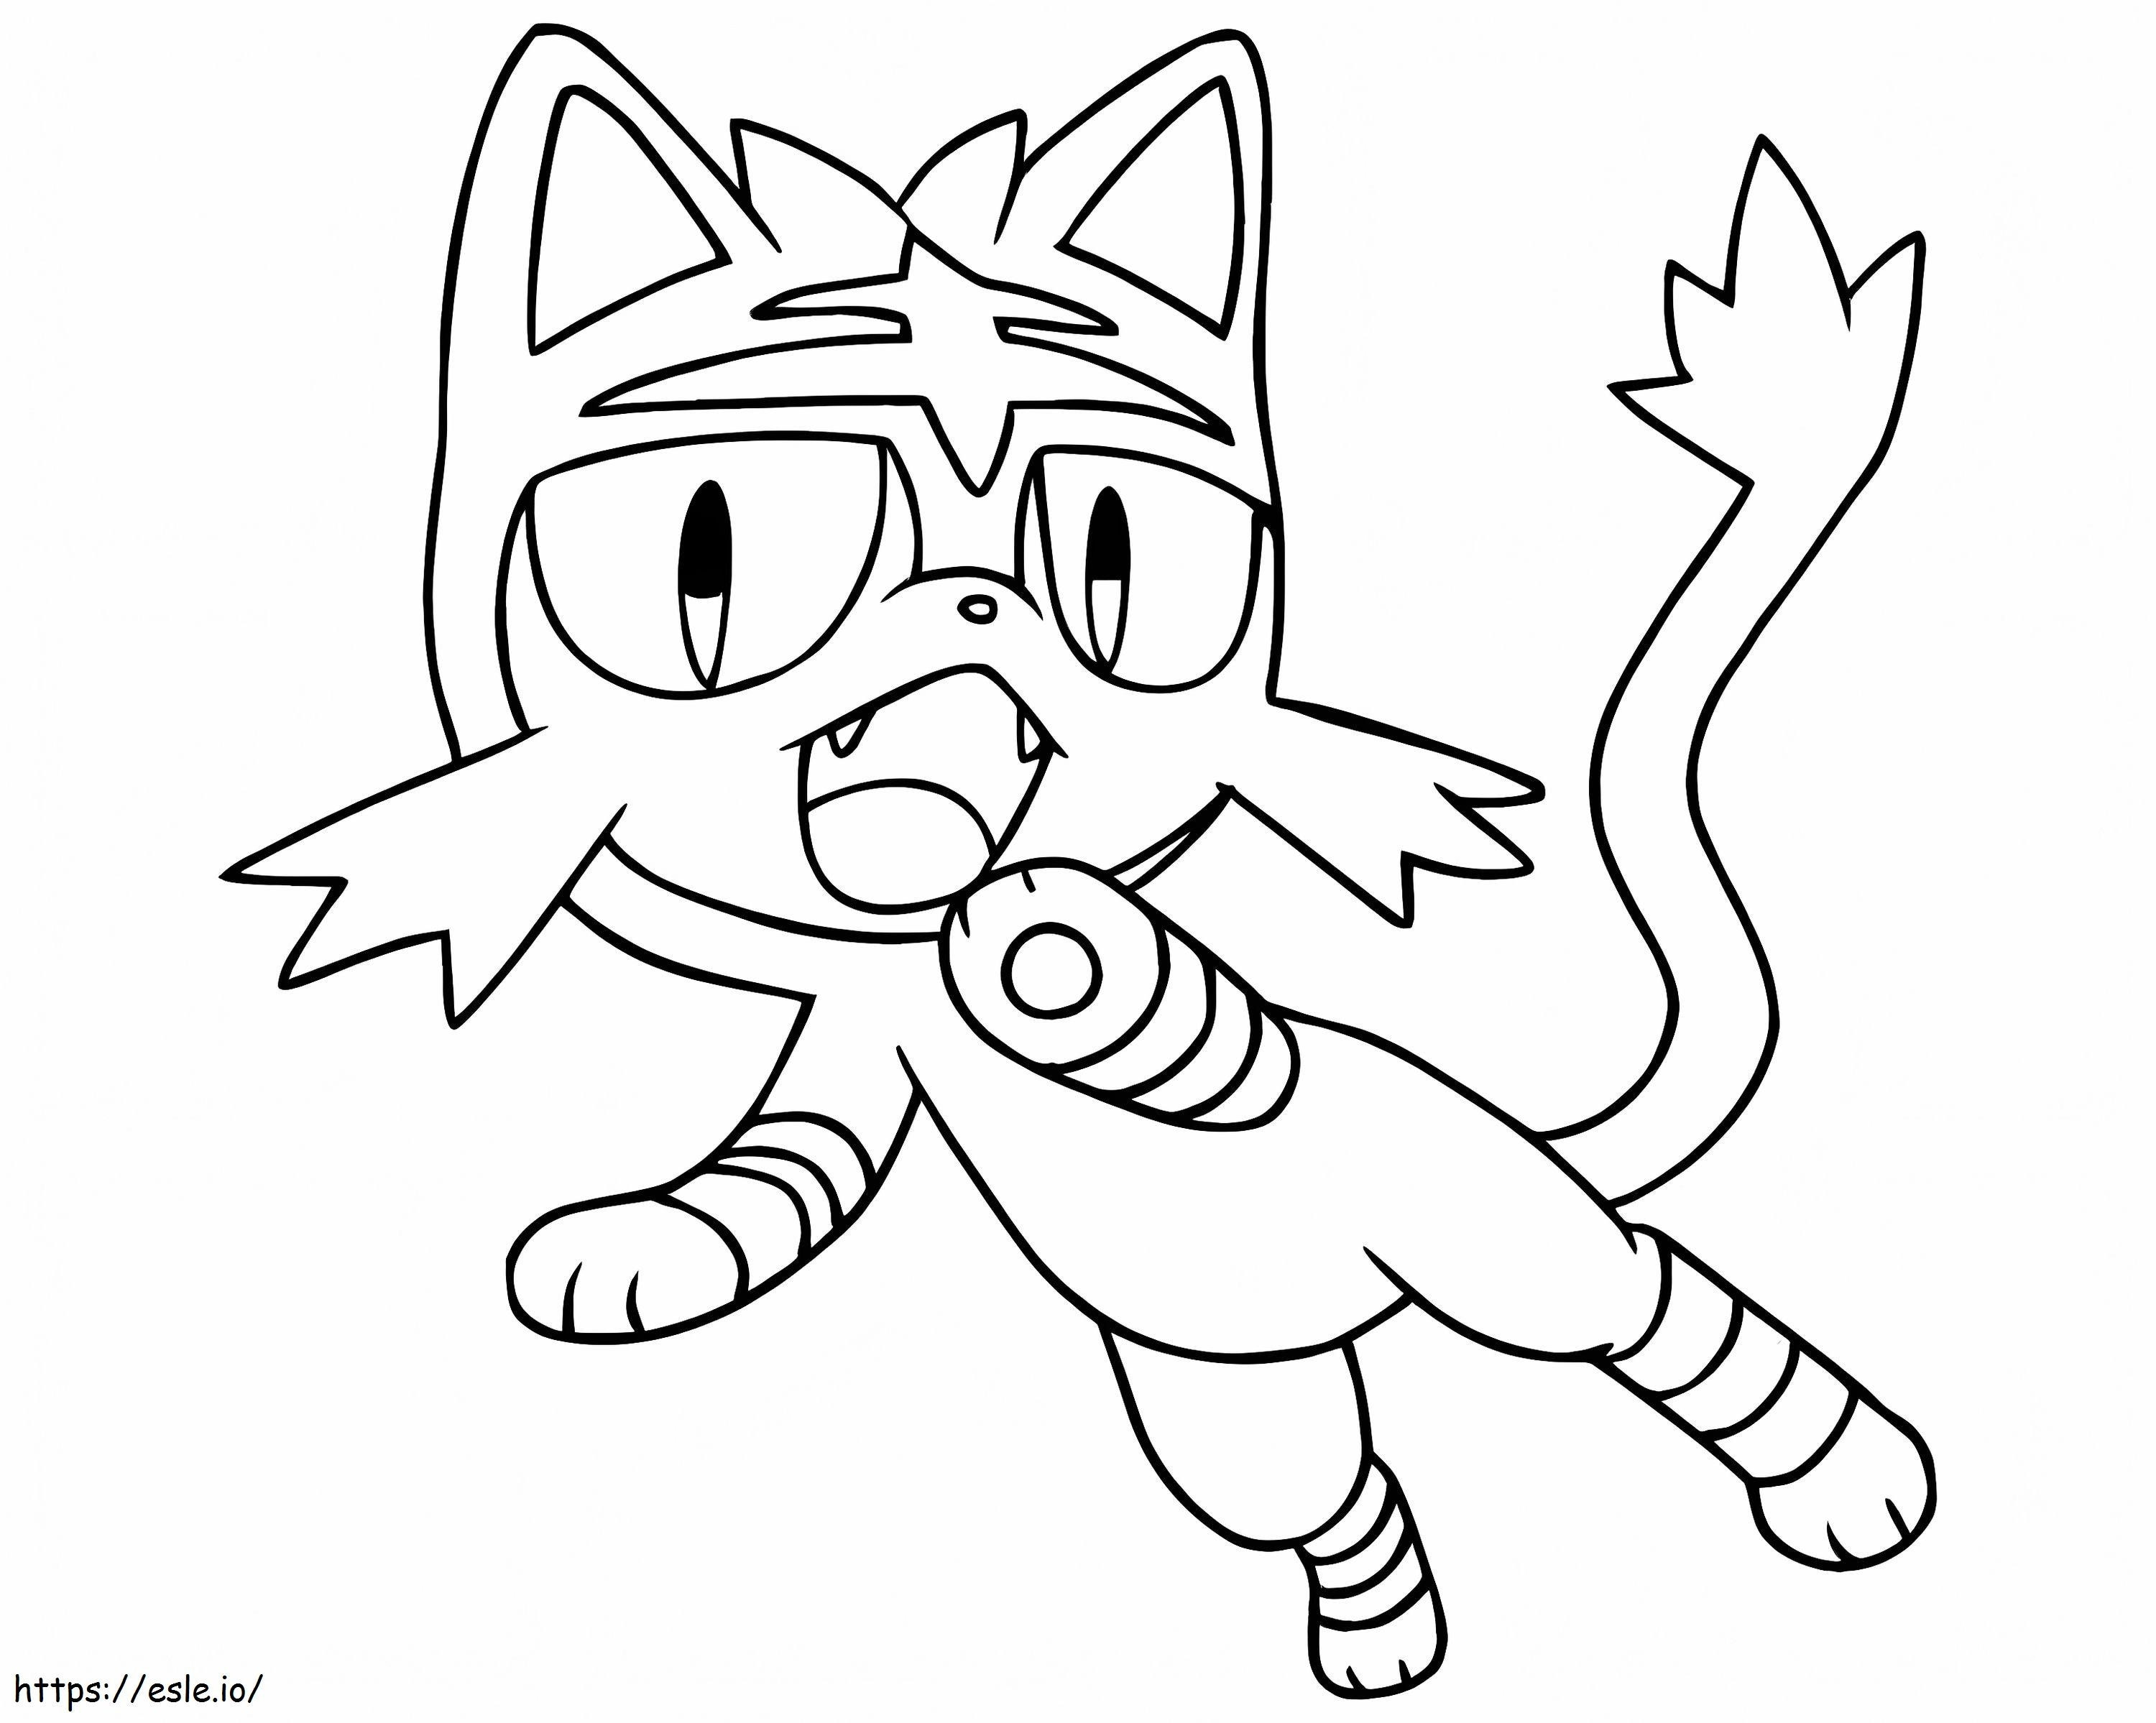 Leave 1 coloring page